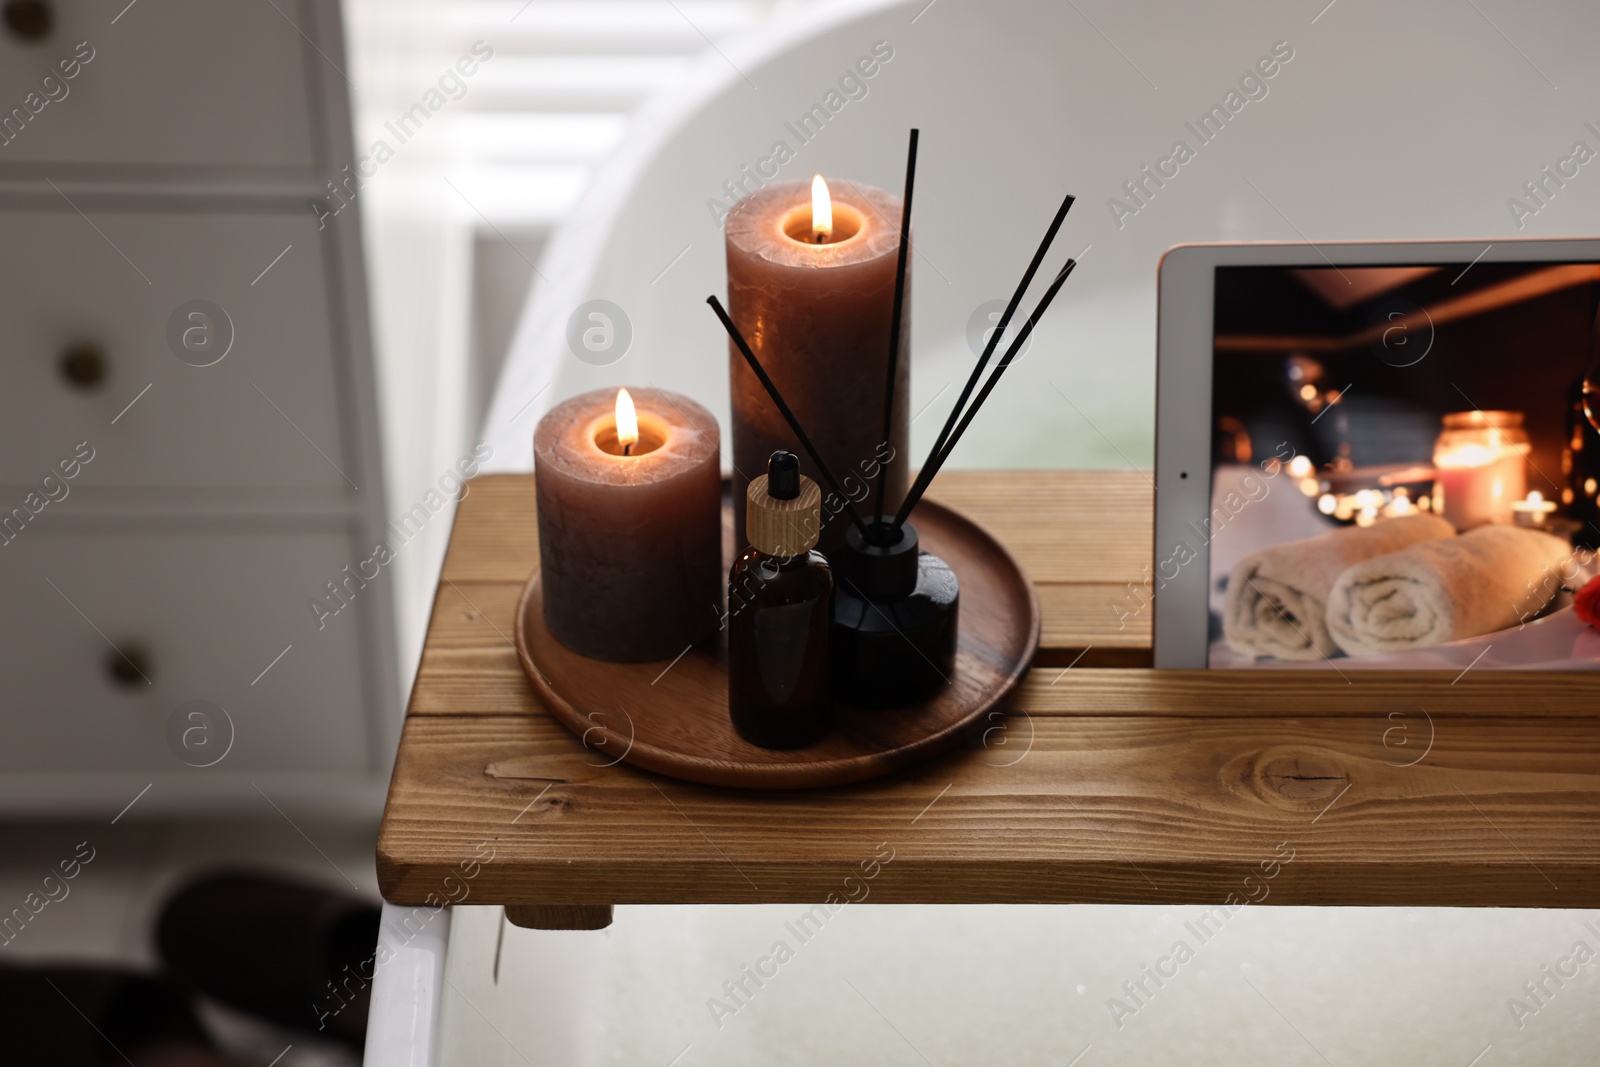 Photo of Wooden tray with tablet, burning candles and aroma products on bathtub in bathroom